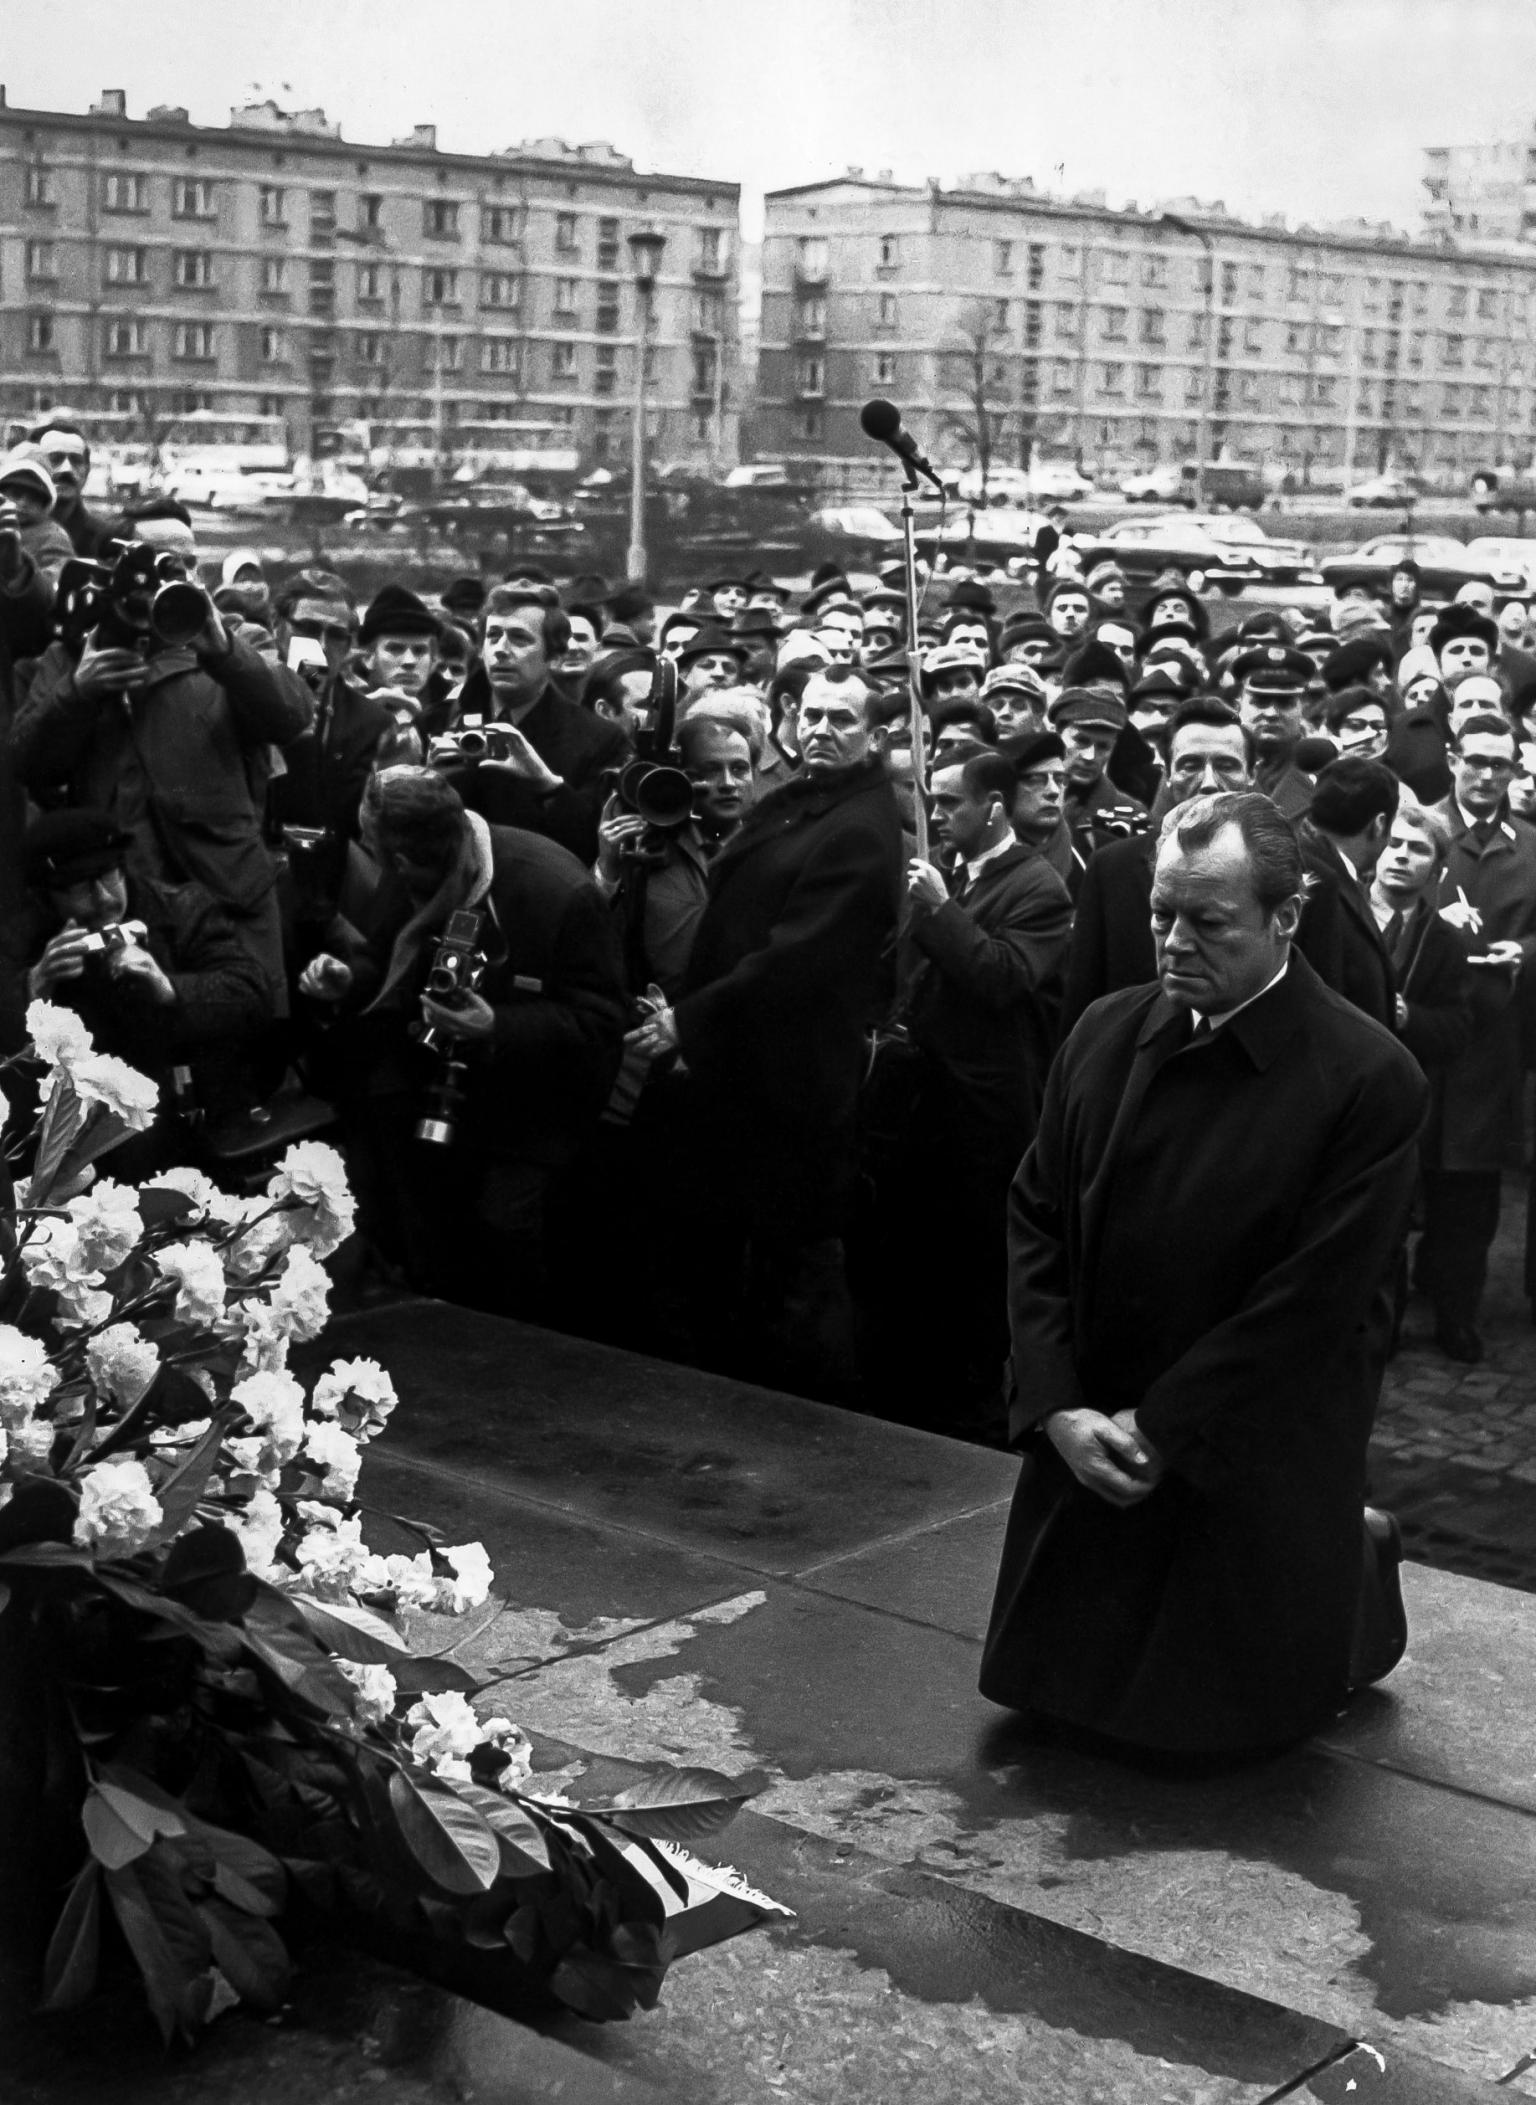 Photograph of a man in a long coat kneeling in front of a memorial wreath on a pedestal as crowd watches and photographers take photos.